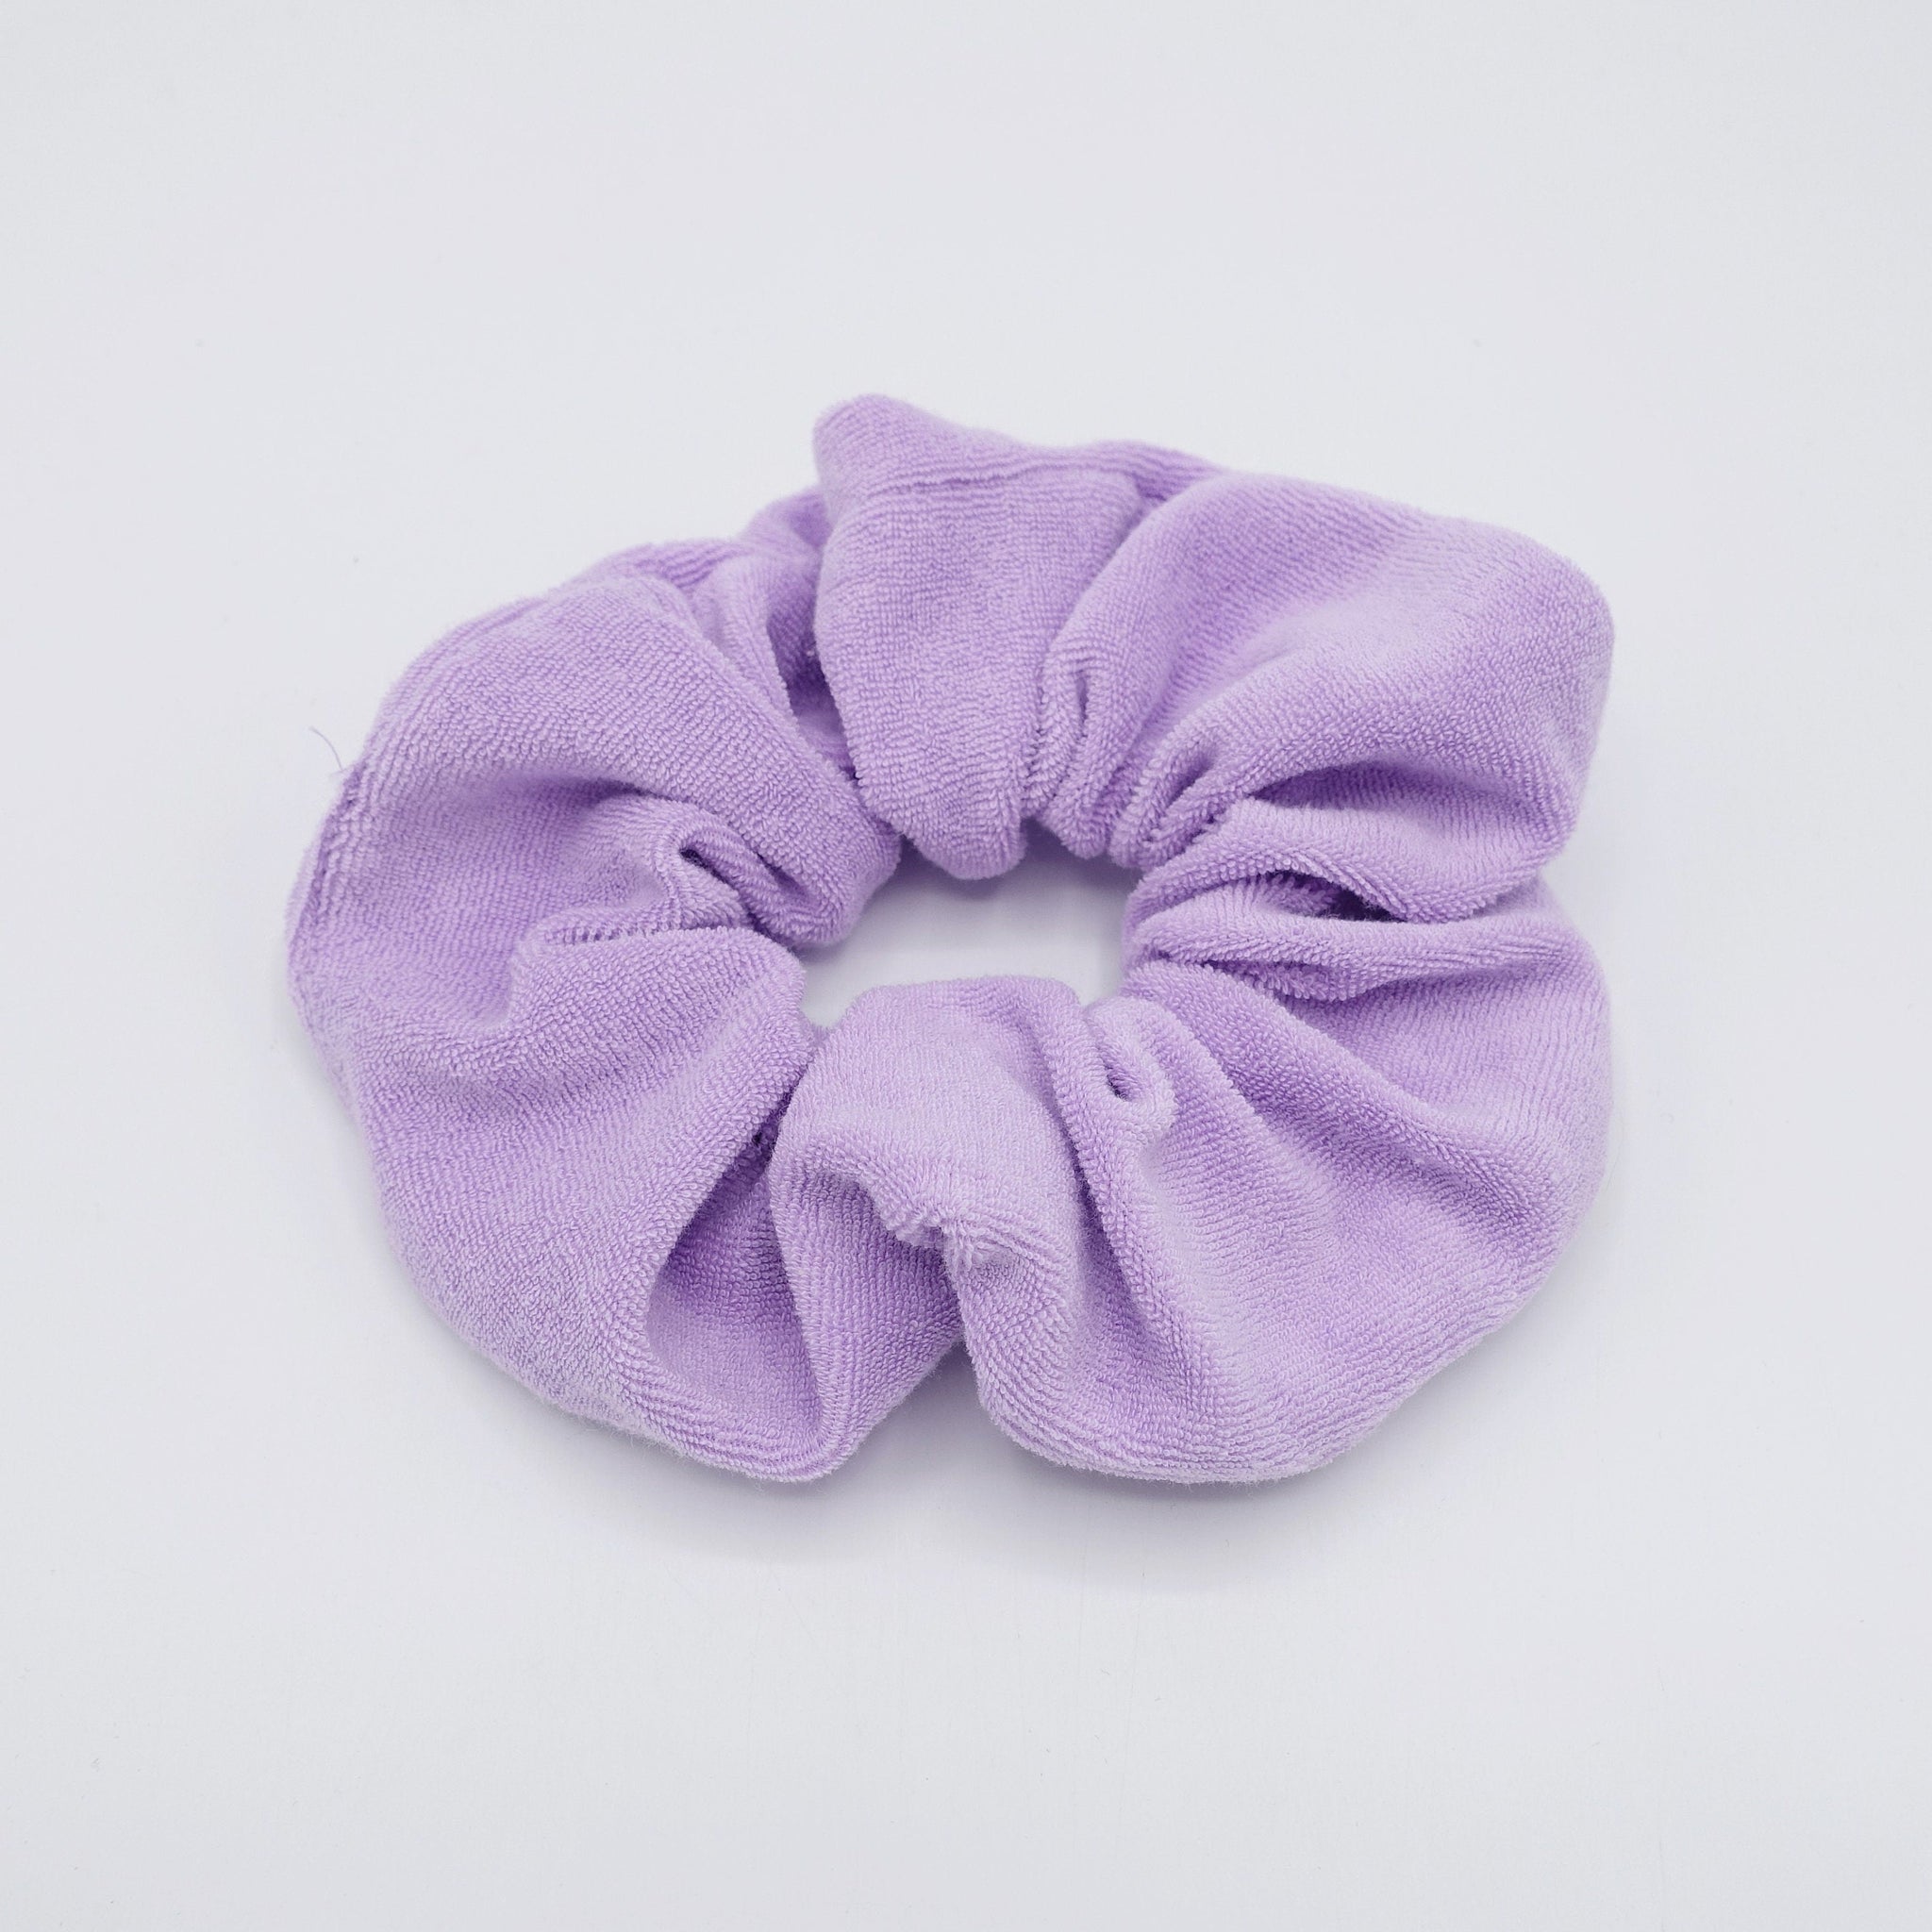 terry scrunchies for women 